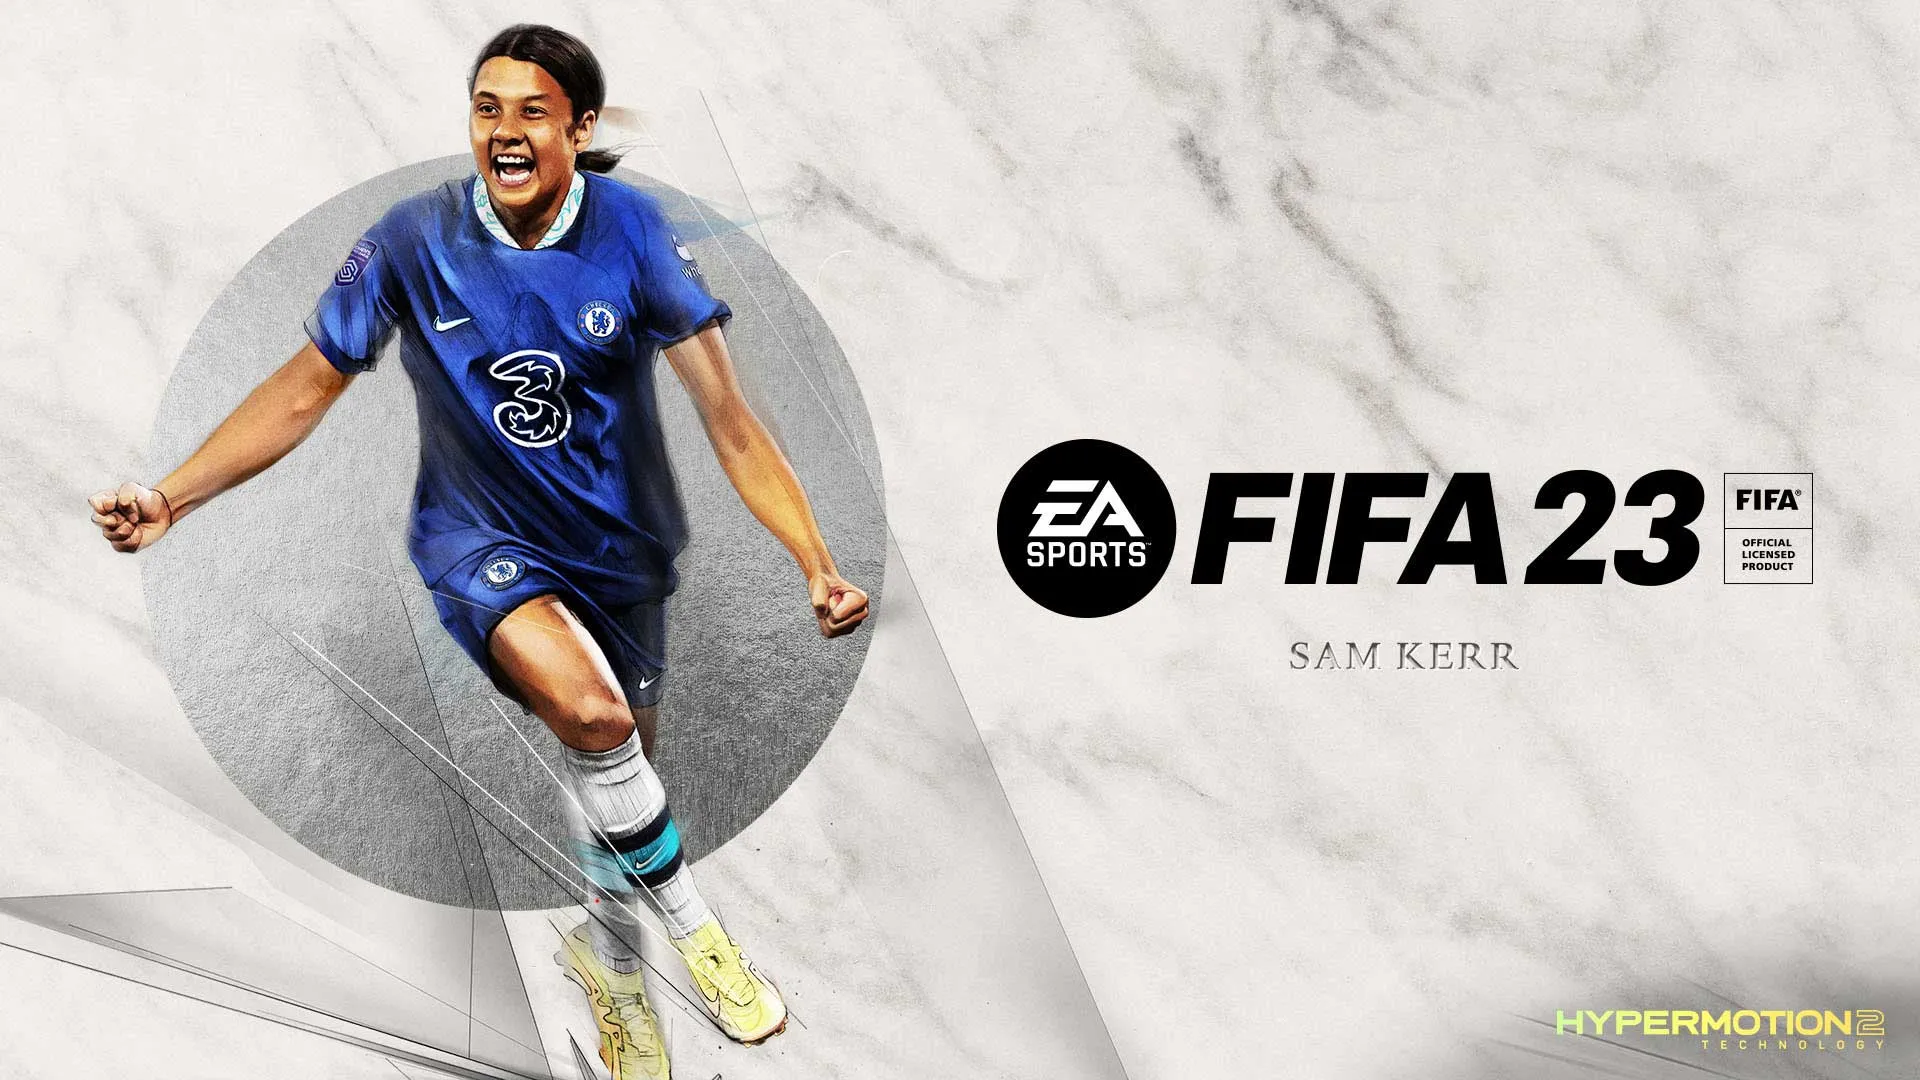 FIFA 23 cover features Sam Kerr, franchise's first female cover athlete